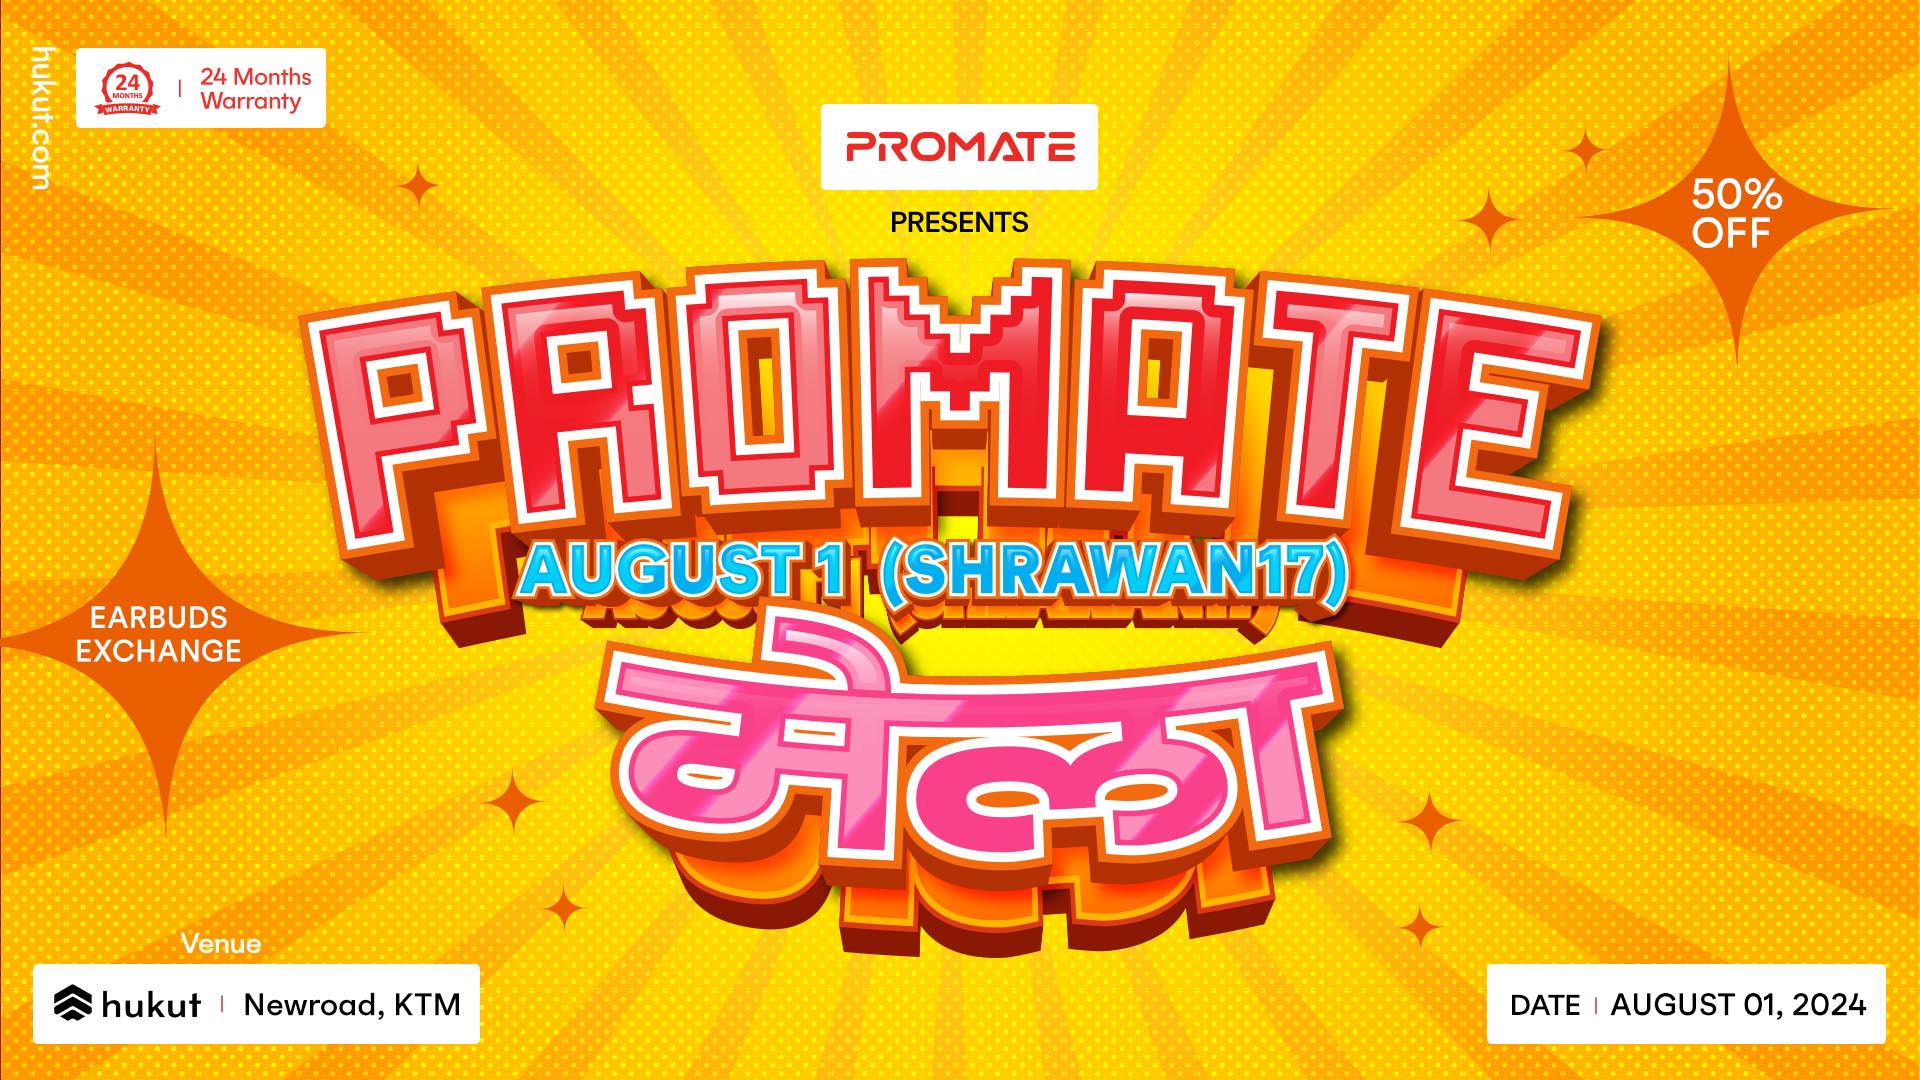 Promate Mela: The biggest single-day tech sale of 2024 at Hukut Store Newroad